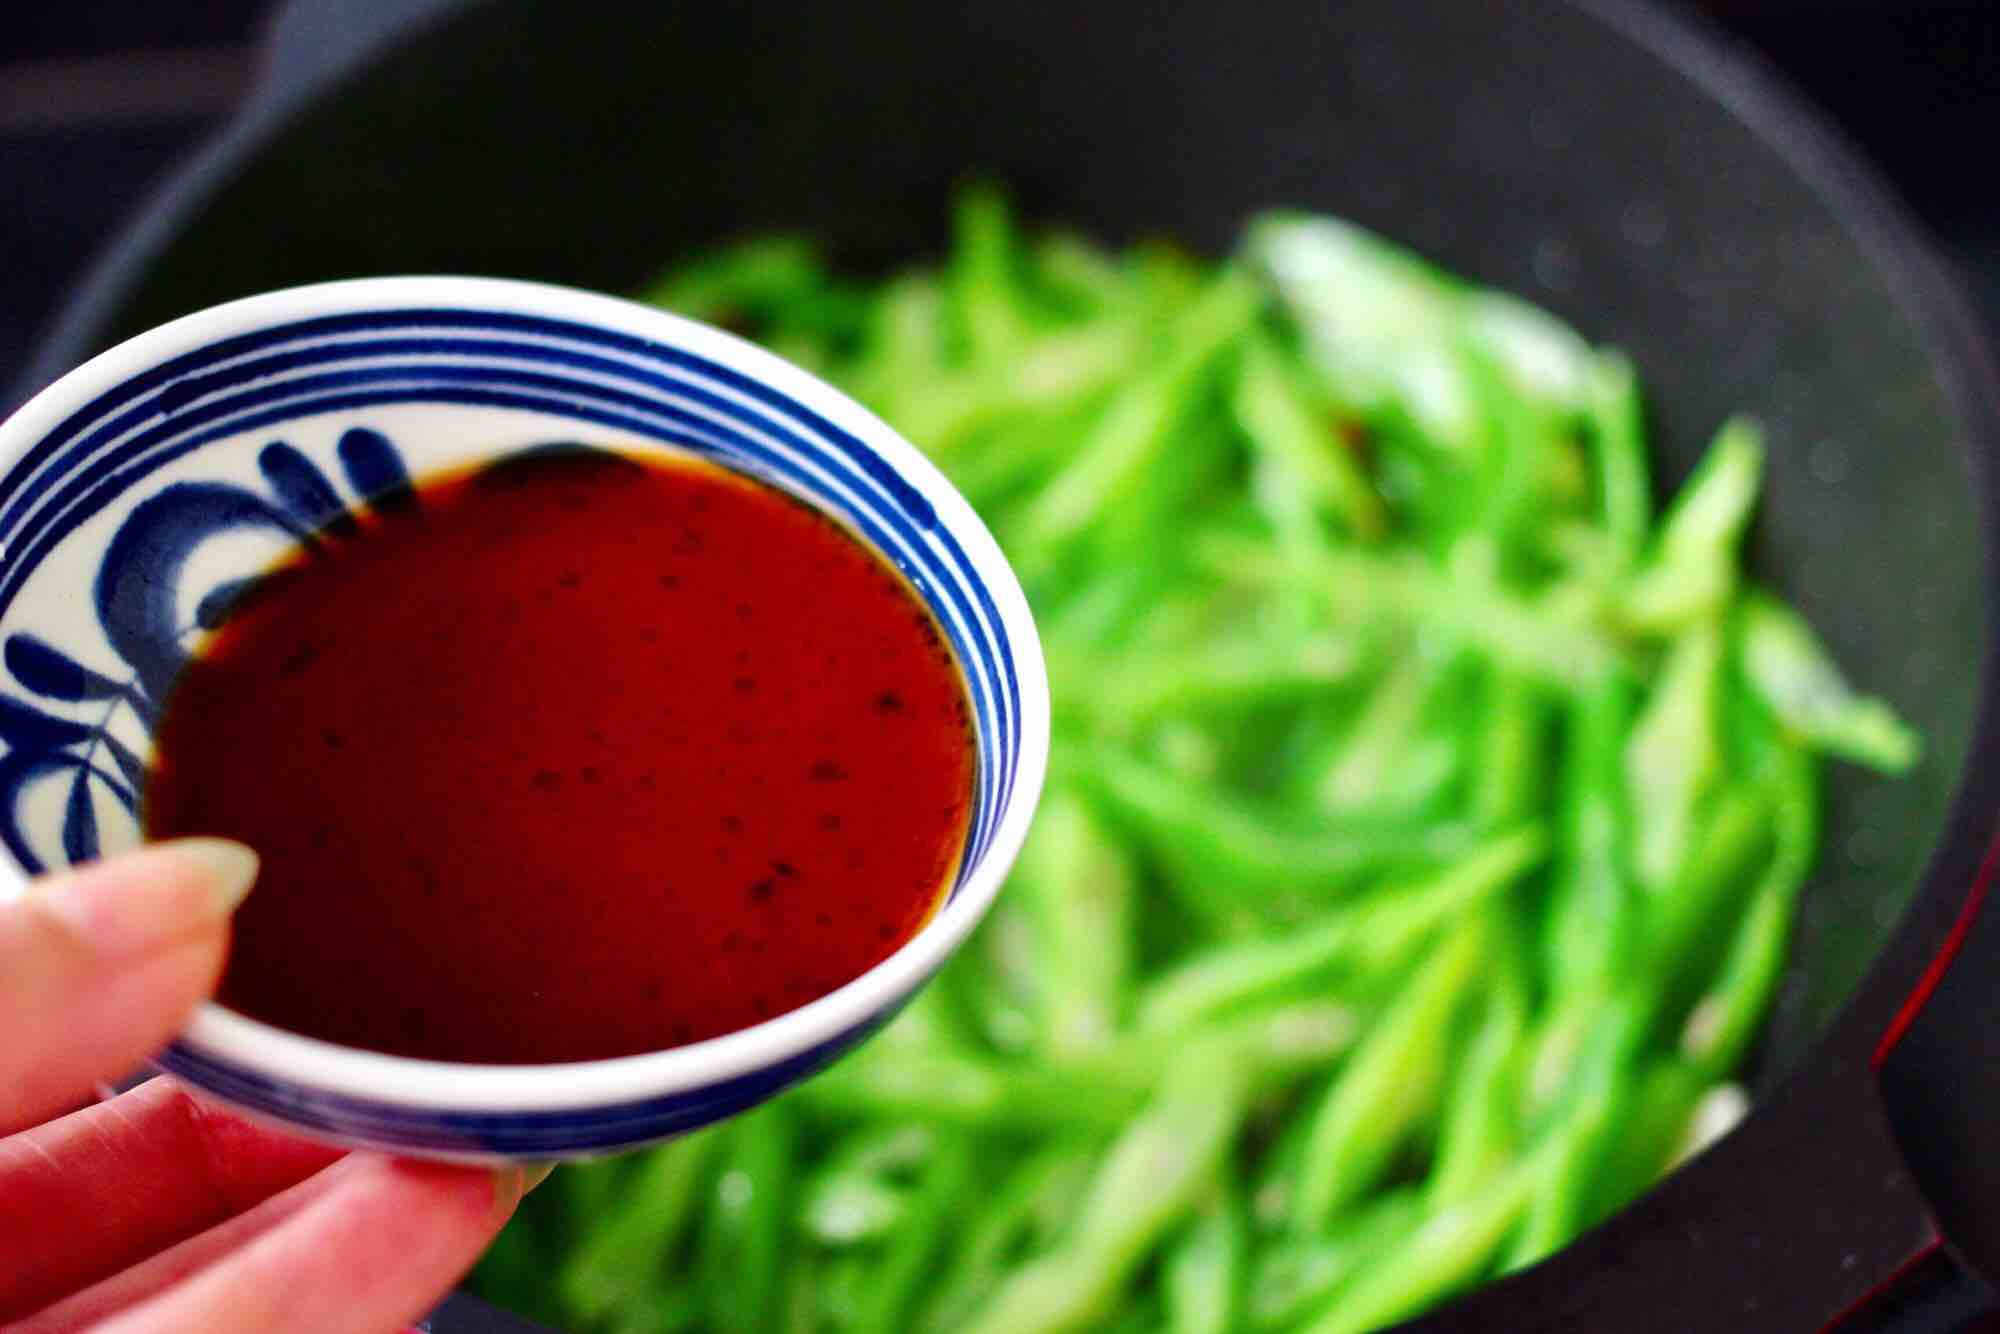 Stir-fried Scallop Meat with String Beans recipe